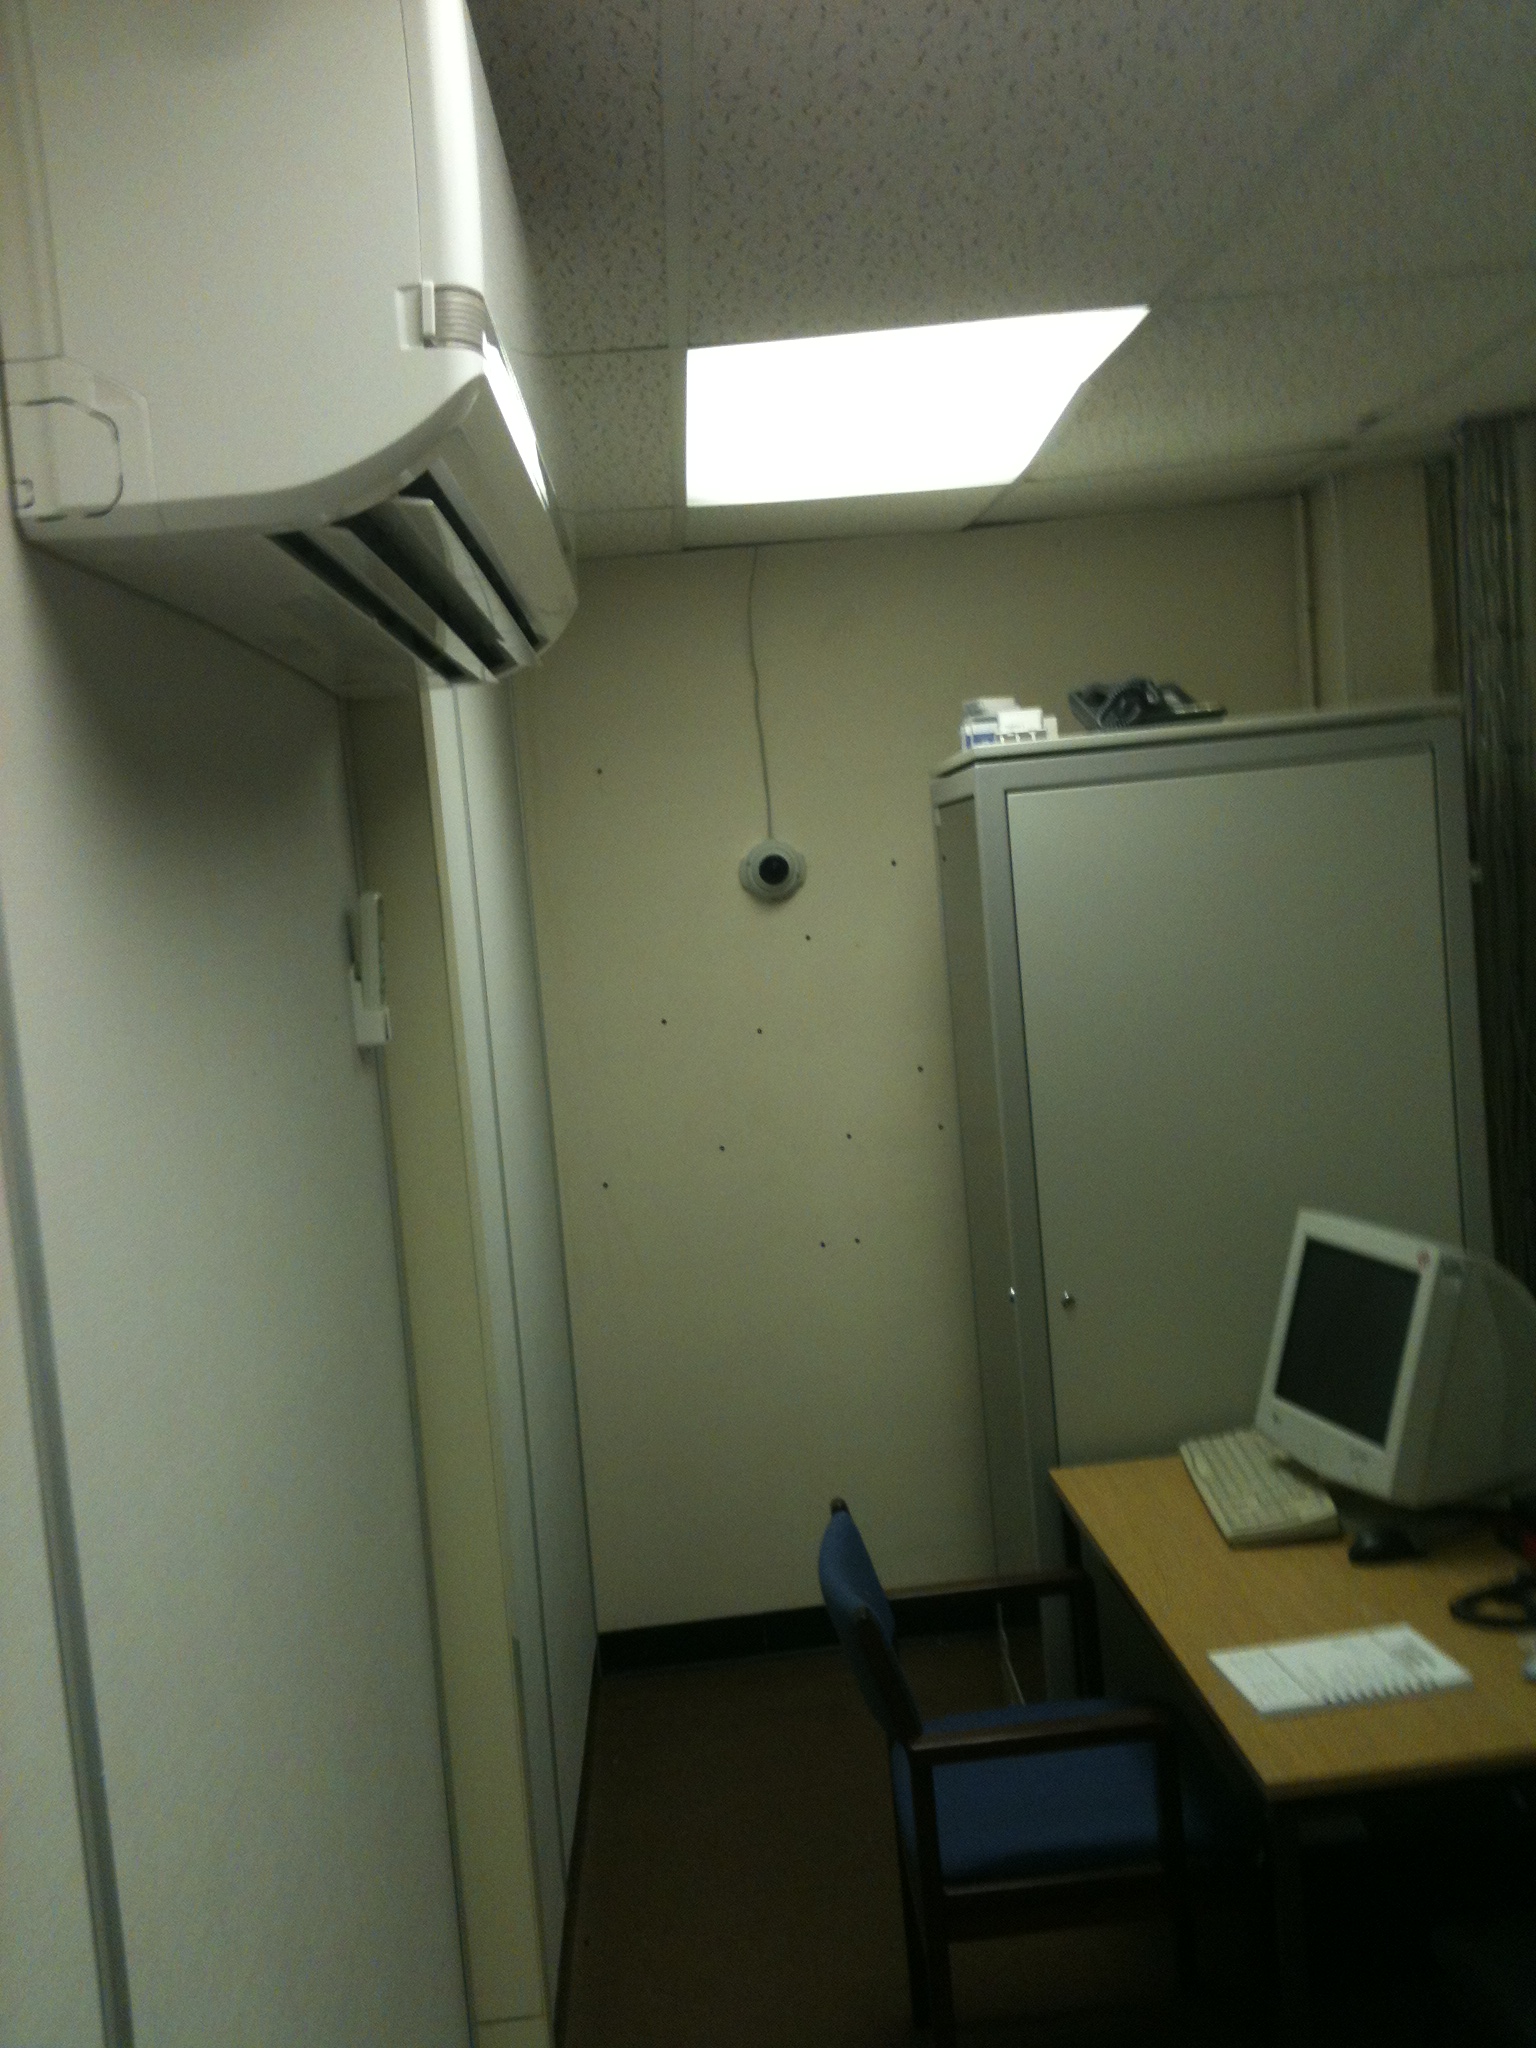 server room air conditioning unit in Fibrefab Haverhill with servers in the background